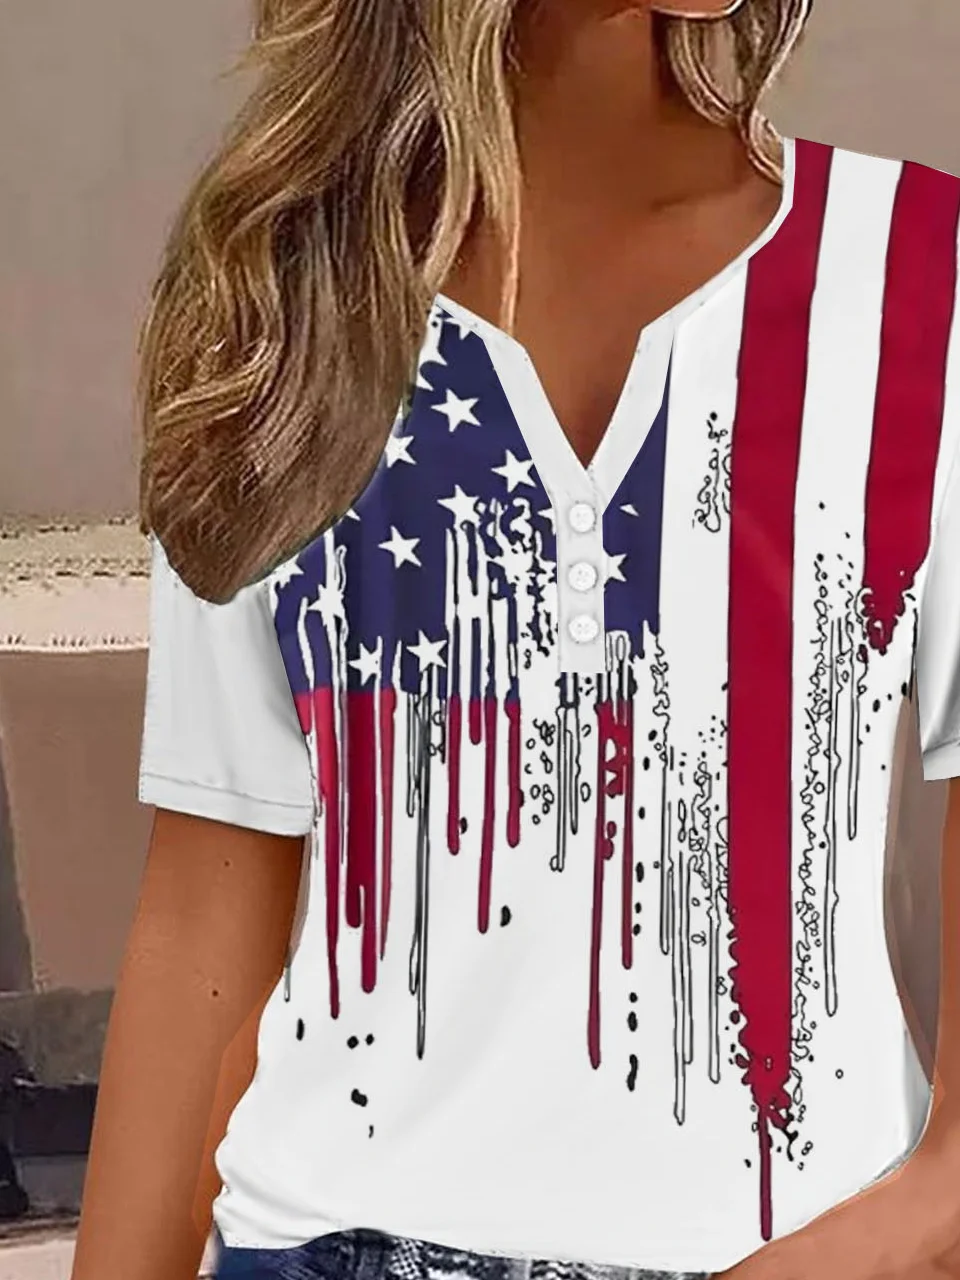 Women's Short Sleeve Tee T-shirt Summer America Flag Buckle Notched Holiday Going Out Casual Top White